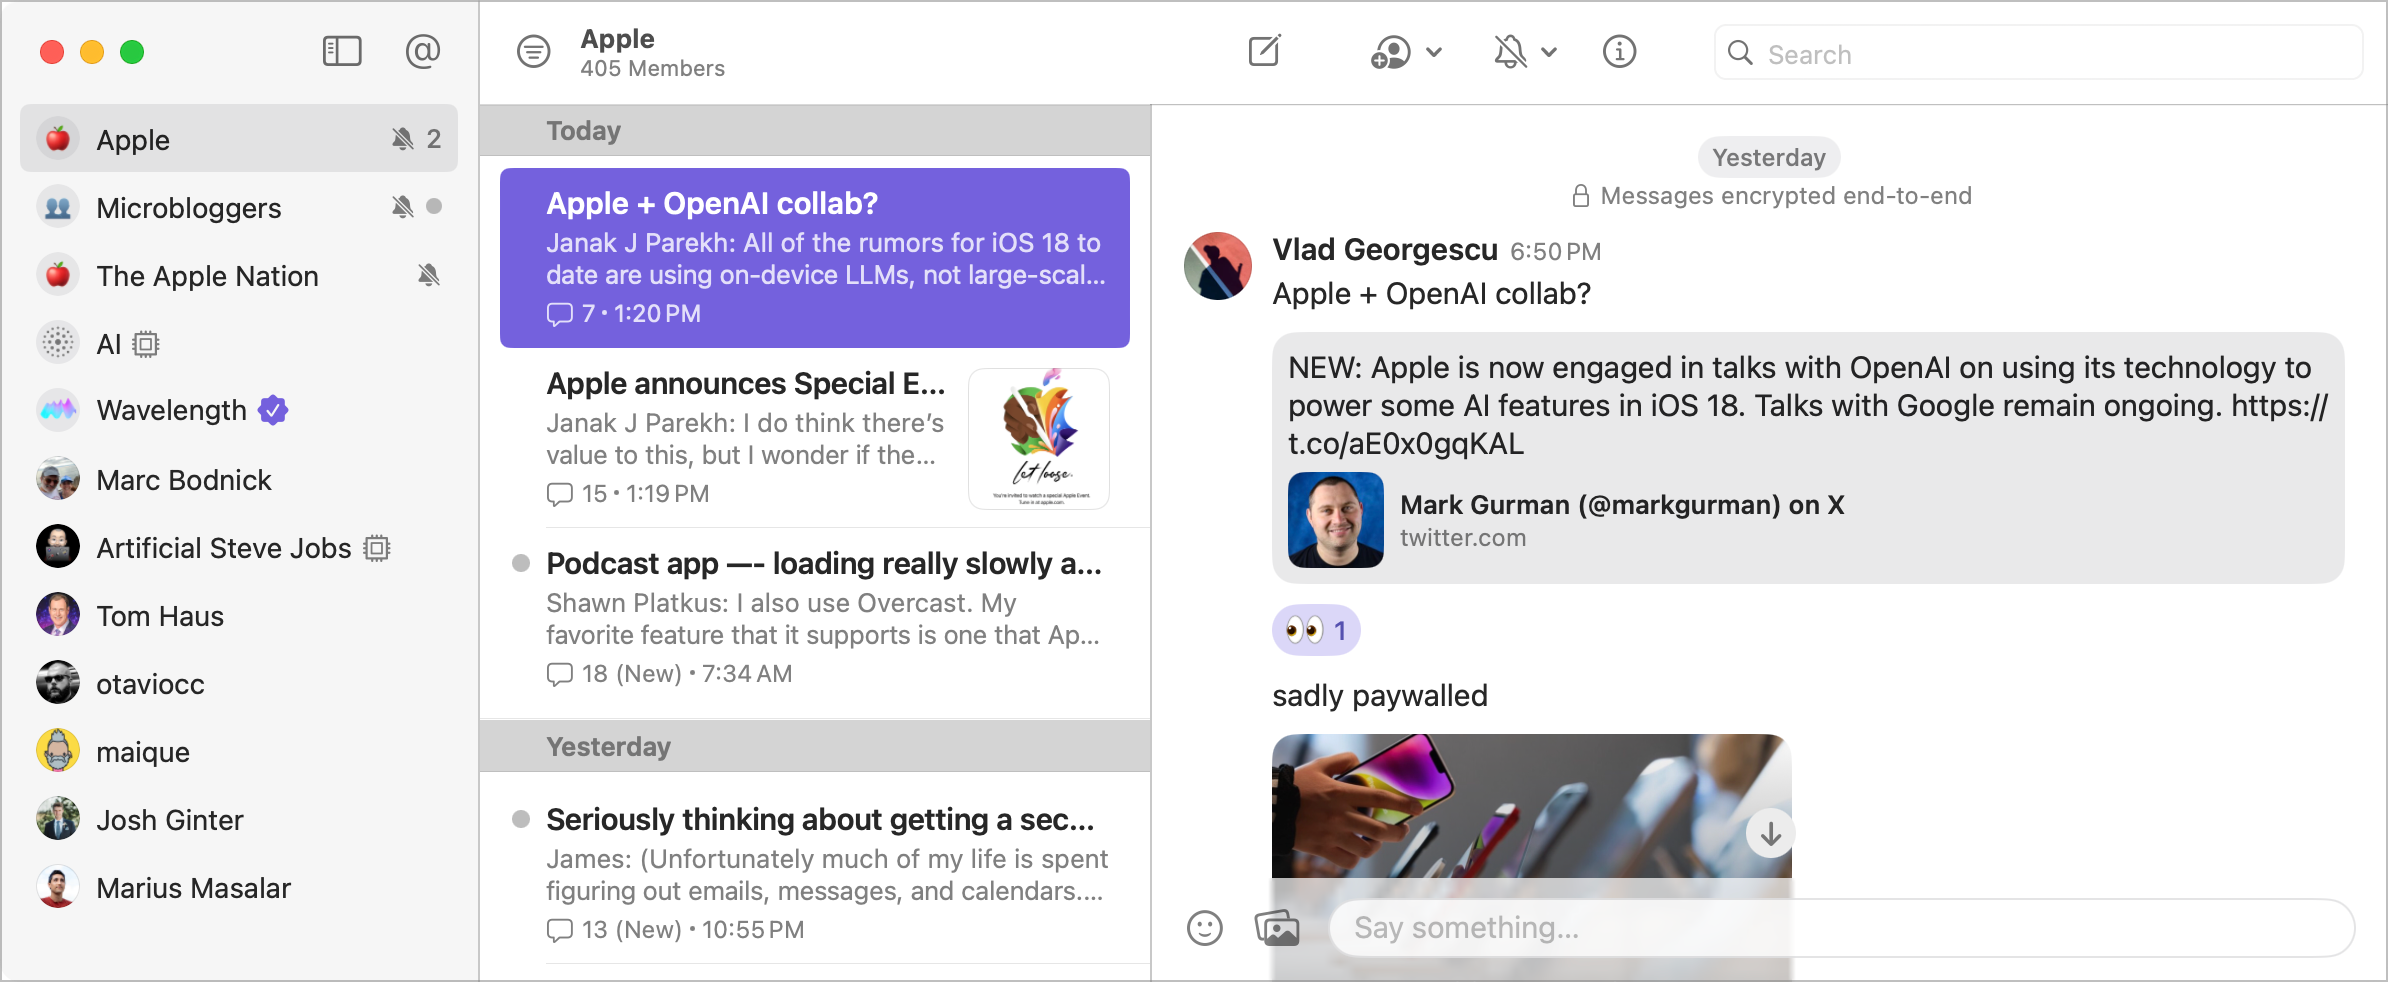 This is a screenshot of the Wavelength messaging app’s main window. On the left sidebar, we can see “AI,” which can answer any request, just like talking to someone. I like this type of integration.